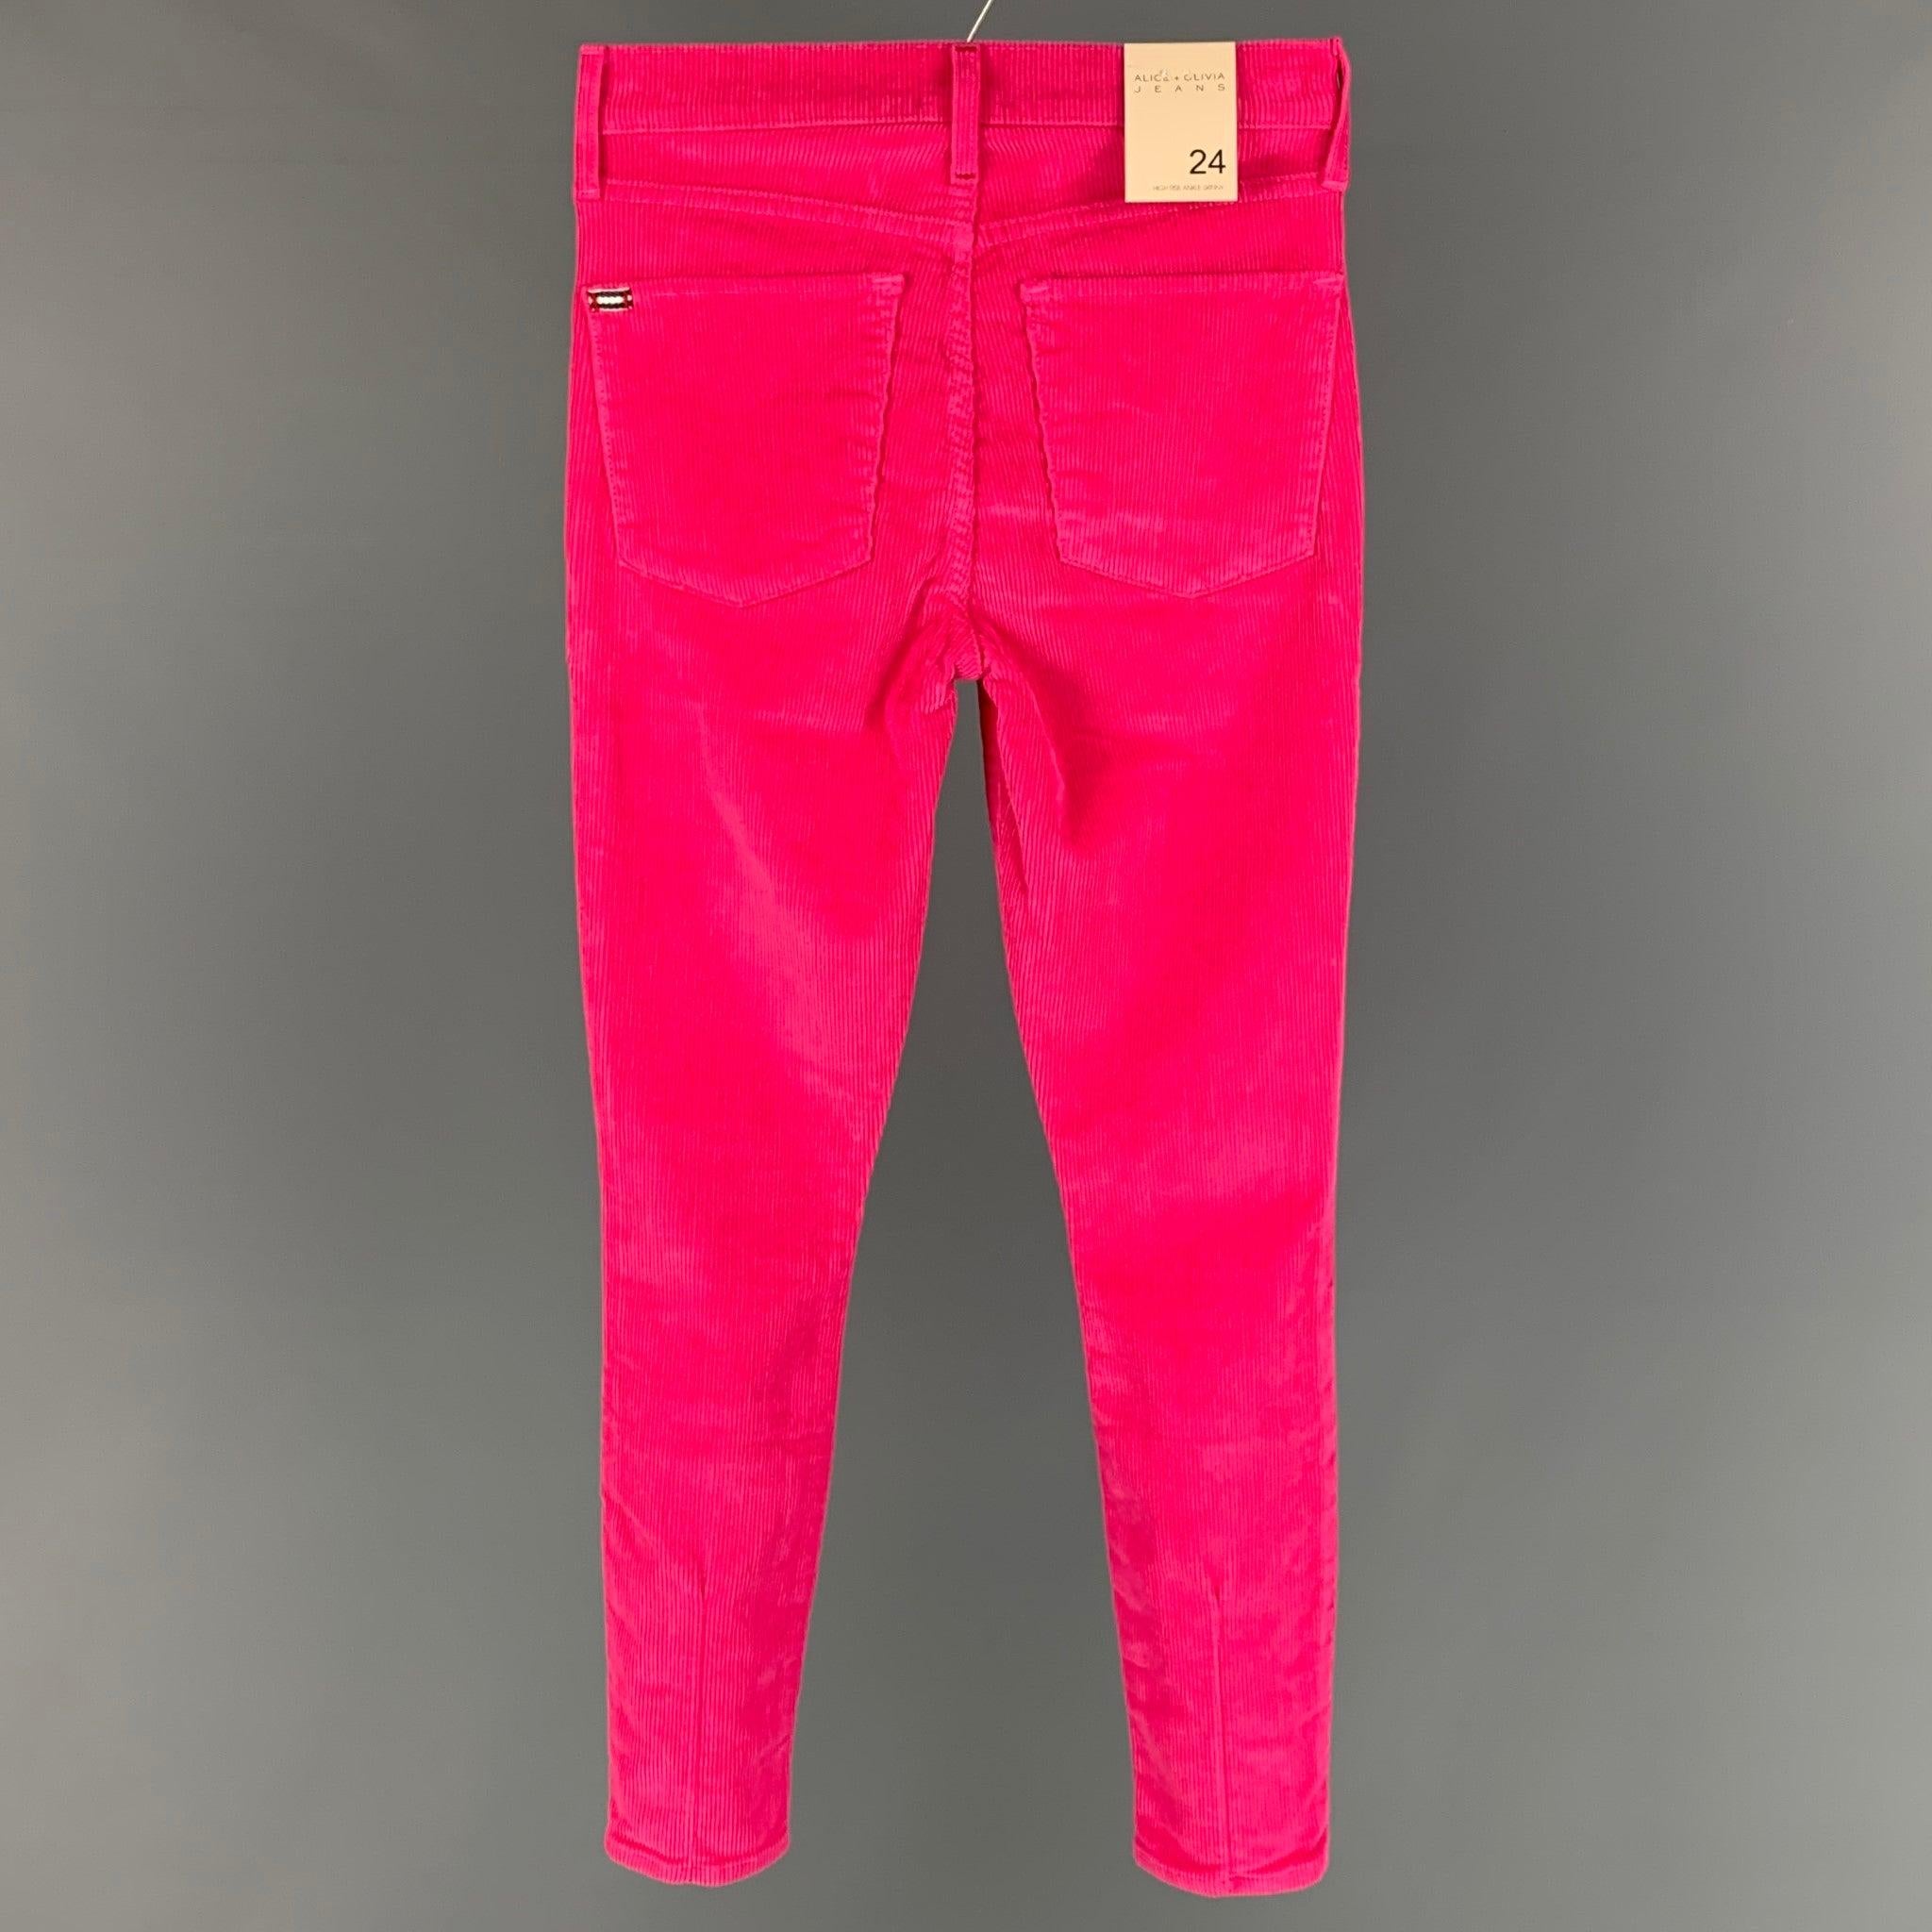 ALICE + OLIVIA casual pants comes in a pink cotton corduroy featuring a jean cut, skinny fit, and a zip fly closure. Made in USA.New With Tags.  

Marked:   24 

Measurements: 
  Waist: 24 inches 
 Rise: 10 inches  Inseam: 27 inches  
  
  
